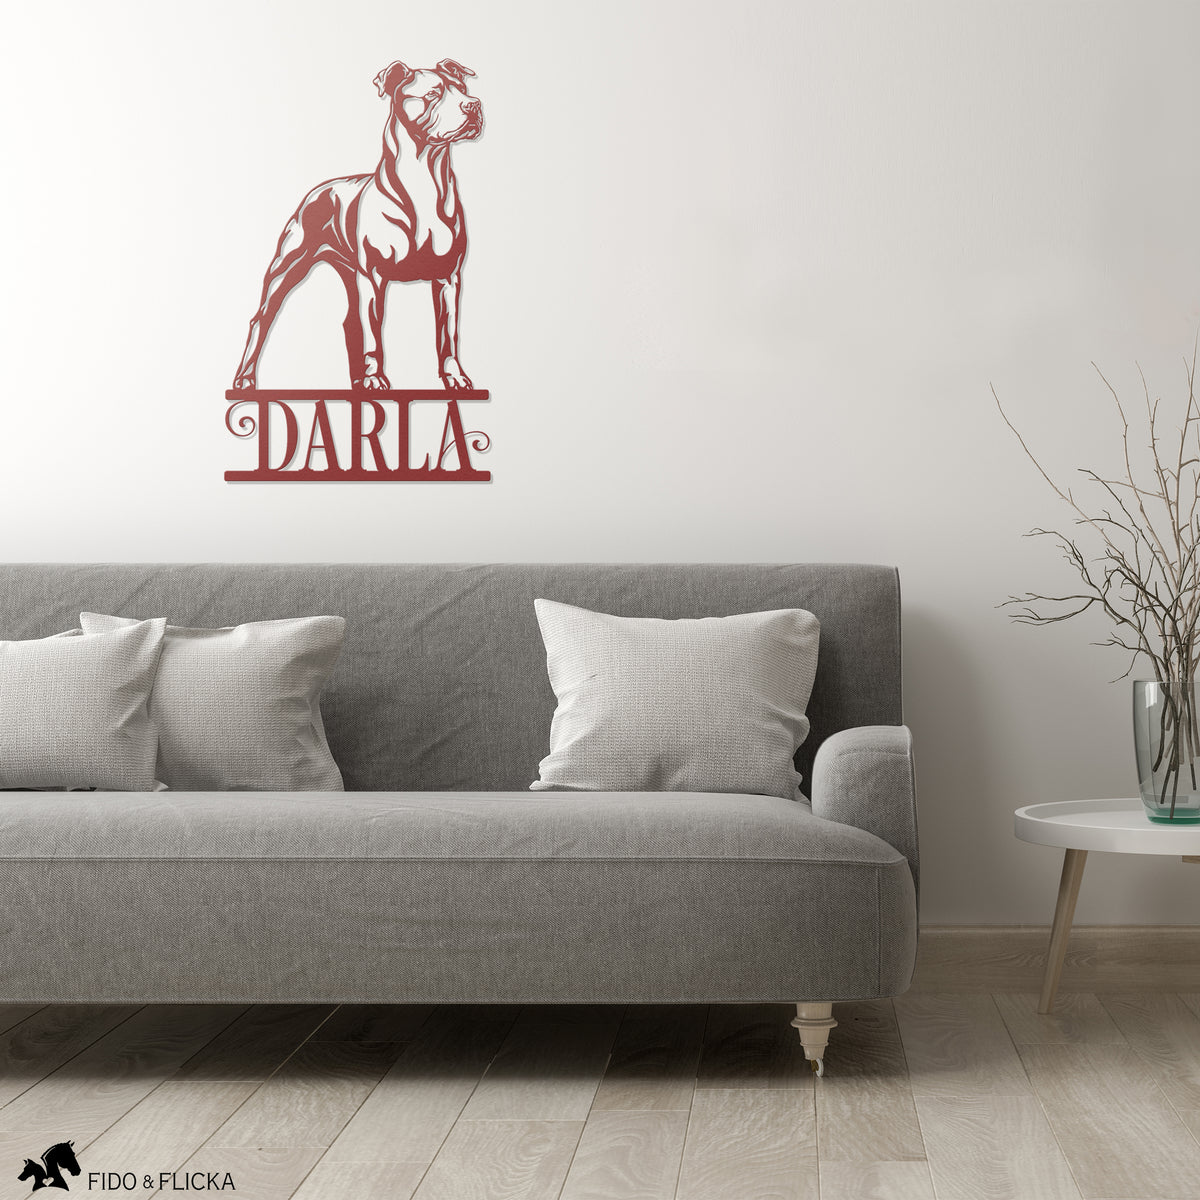 red metal personalized pitbull sign in living room